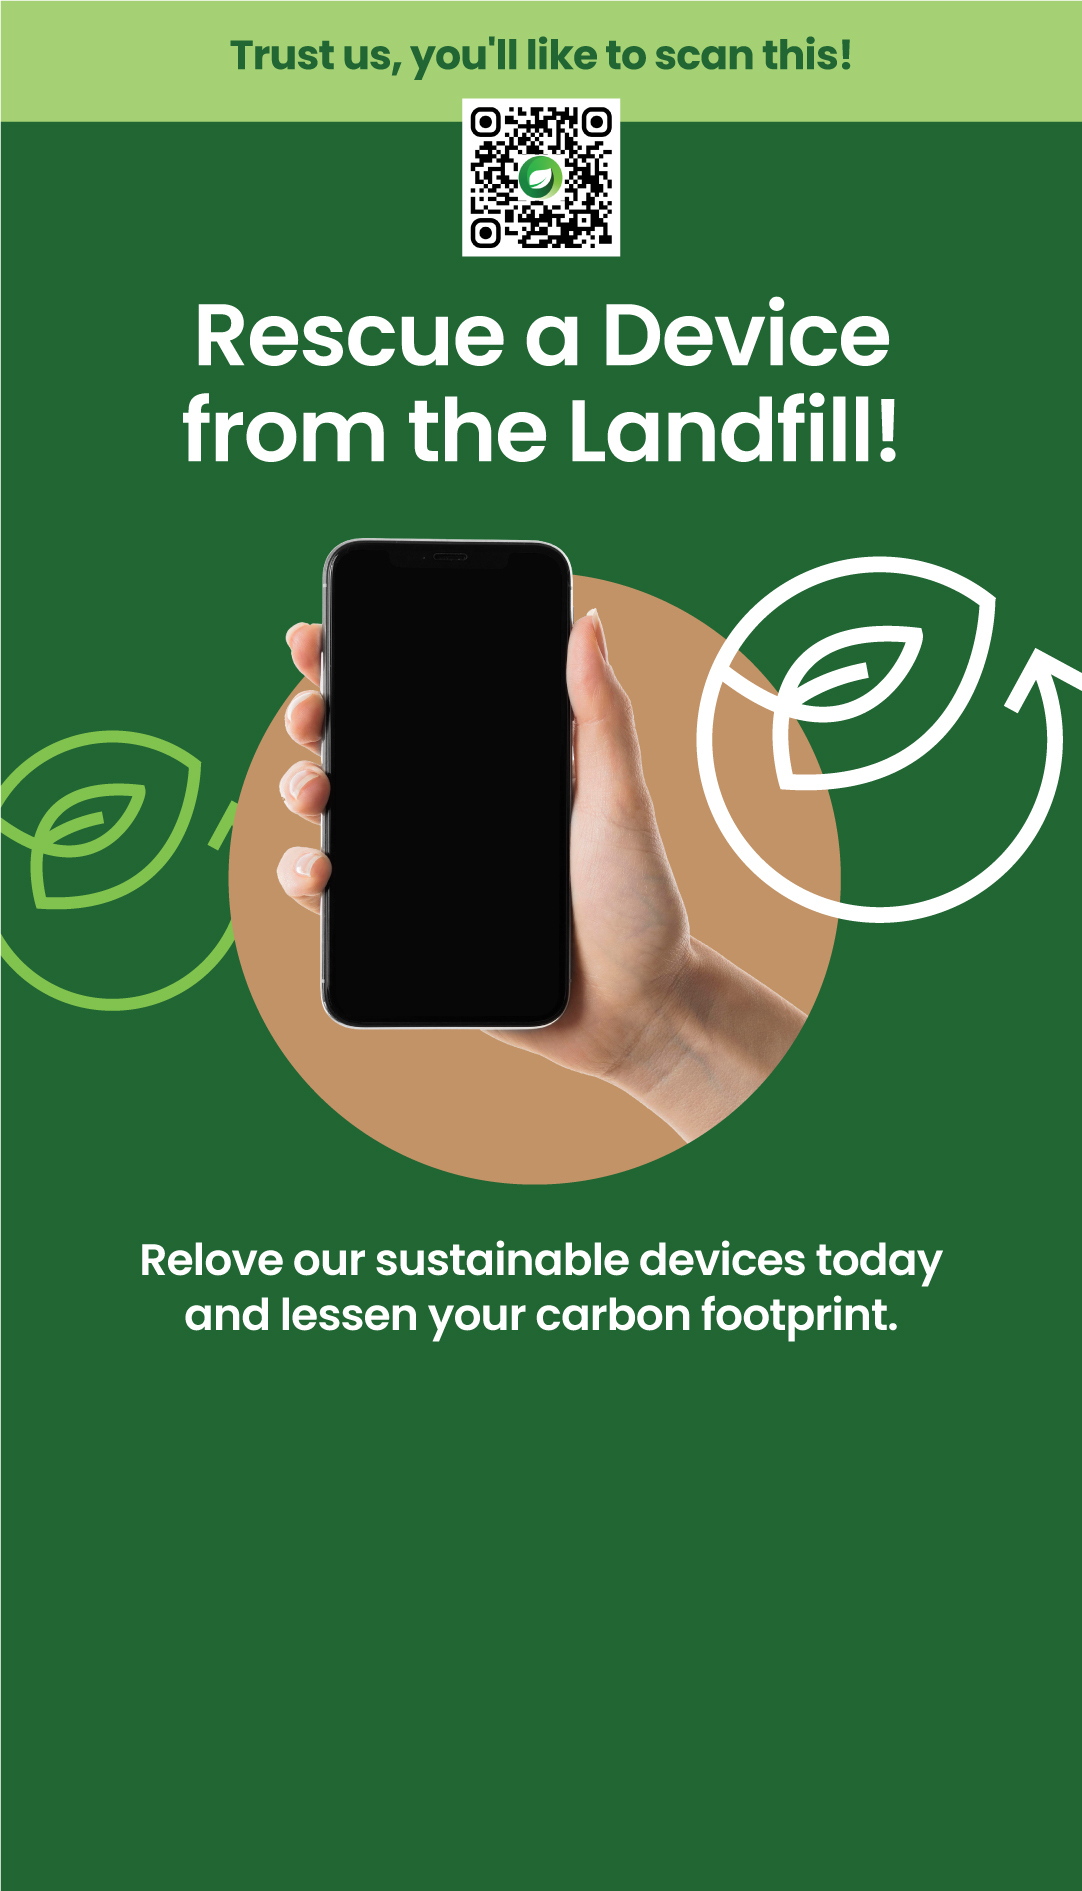 Rescue a Device from the Landfill